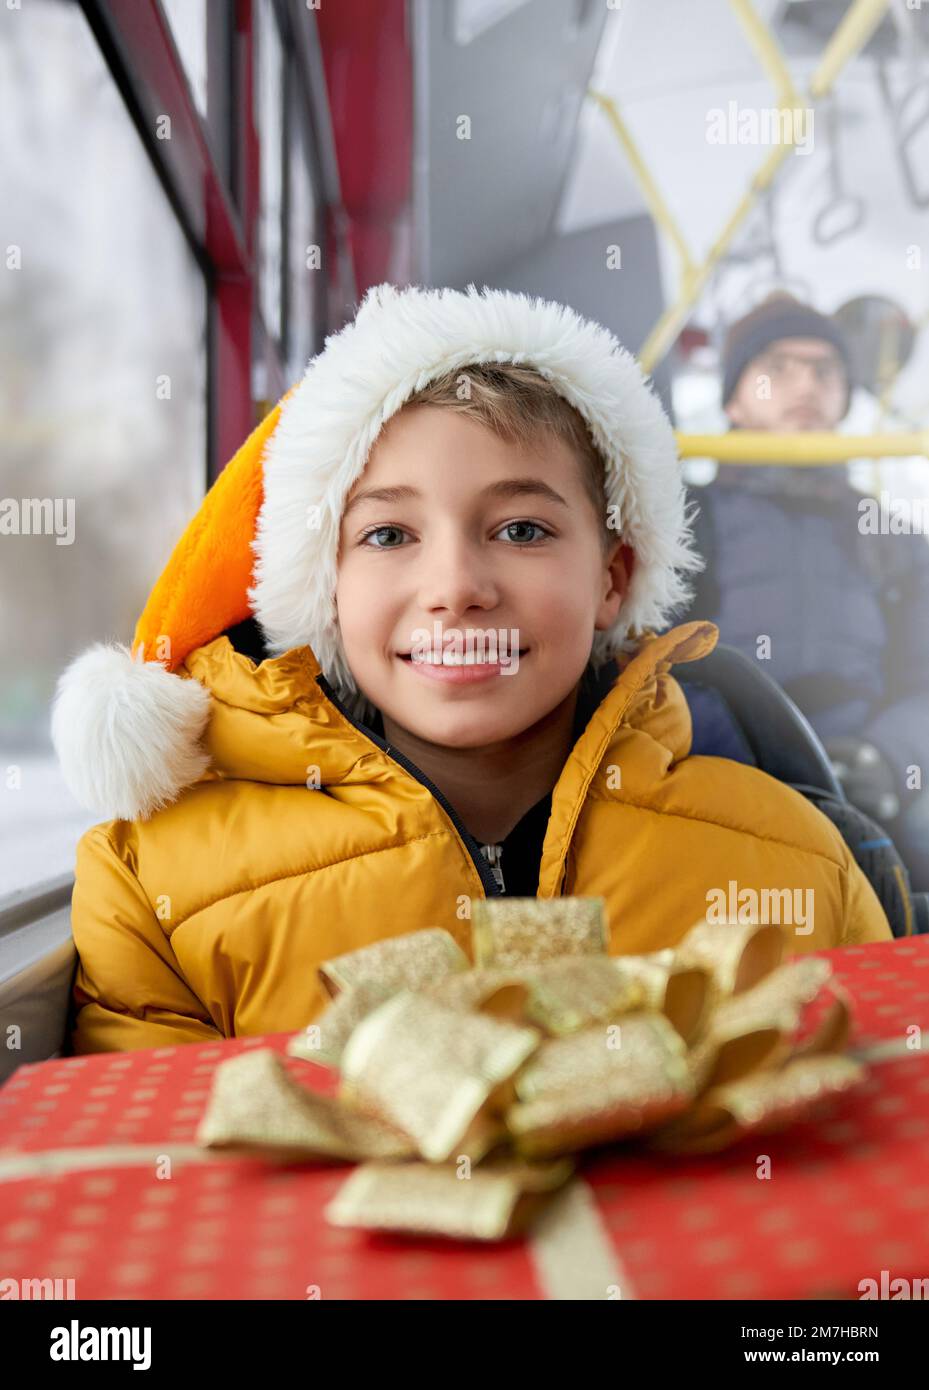 Front view of happy, cheerful kid traveling by public transport, bus during Christmas, winter holidays. Boy with Christmas hat sitting, looking at camera. Concept of winter vacations. Stock Photo